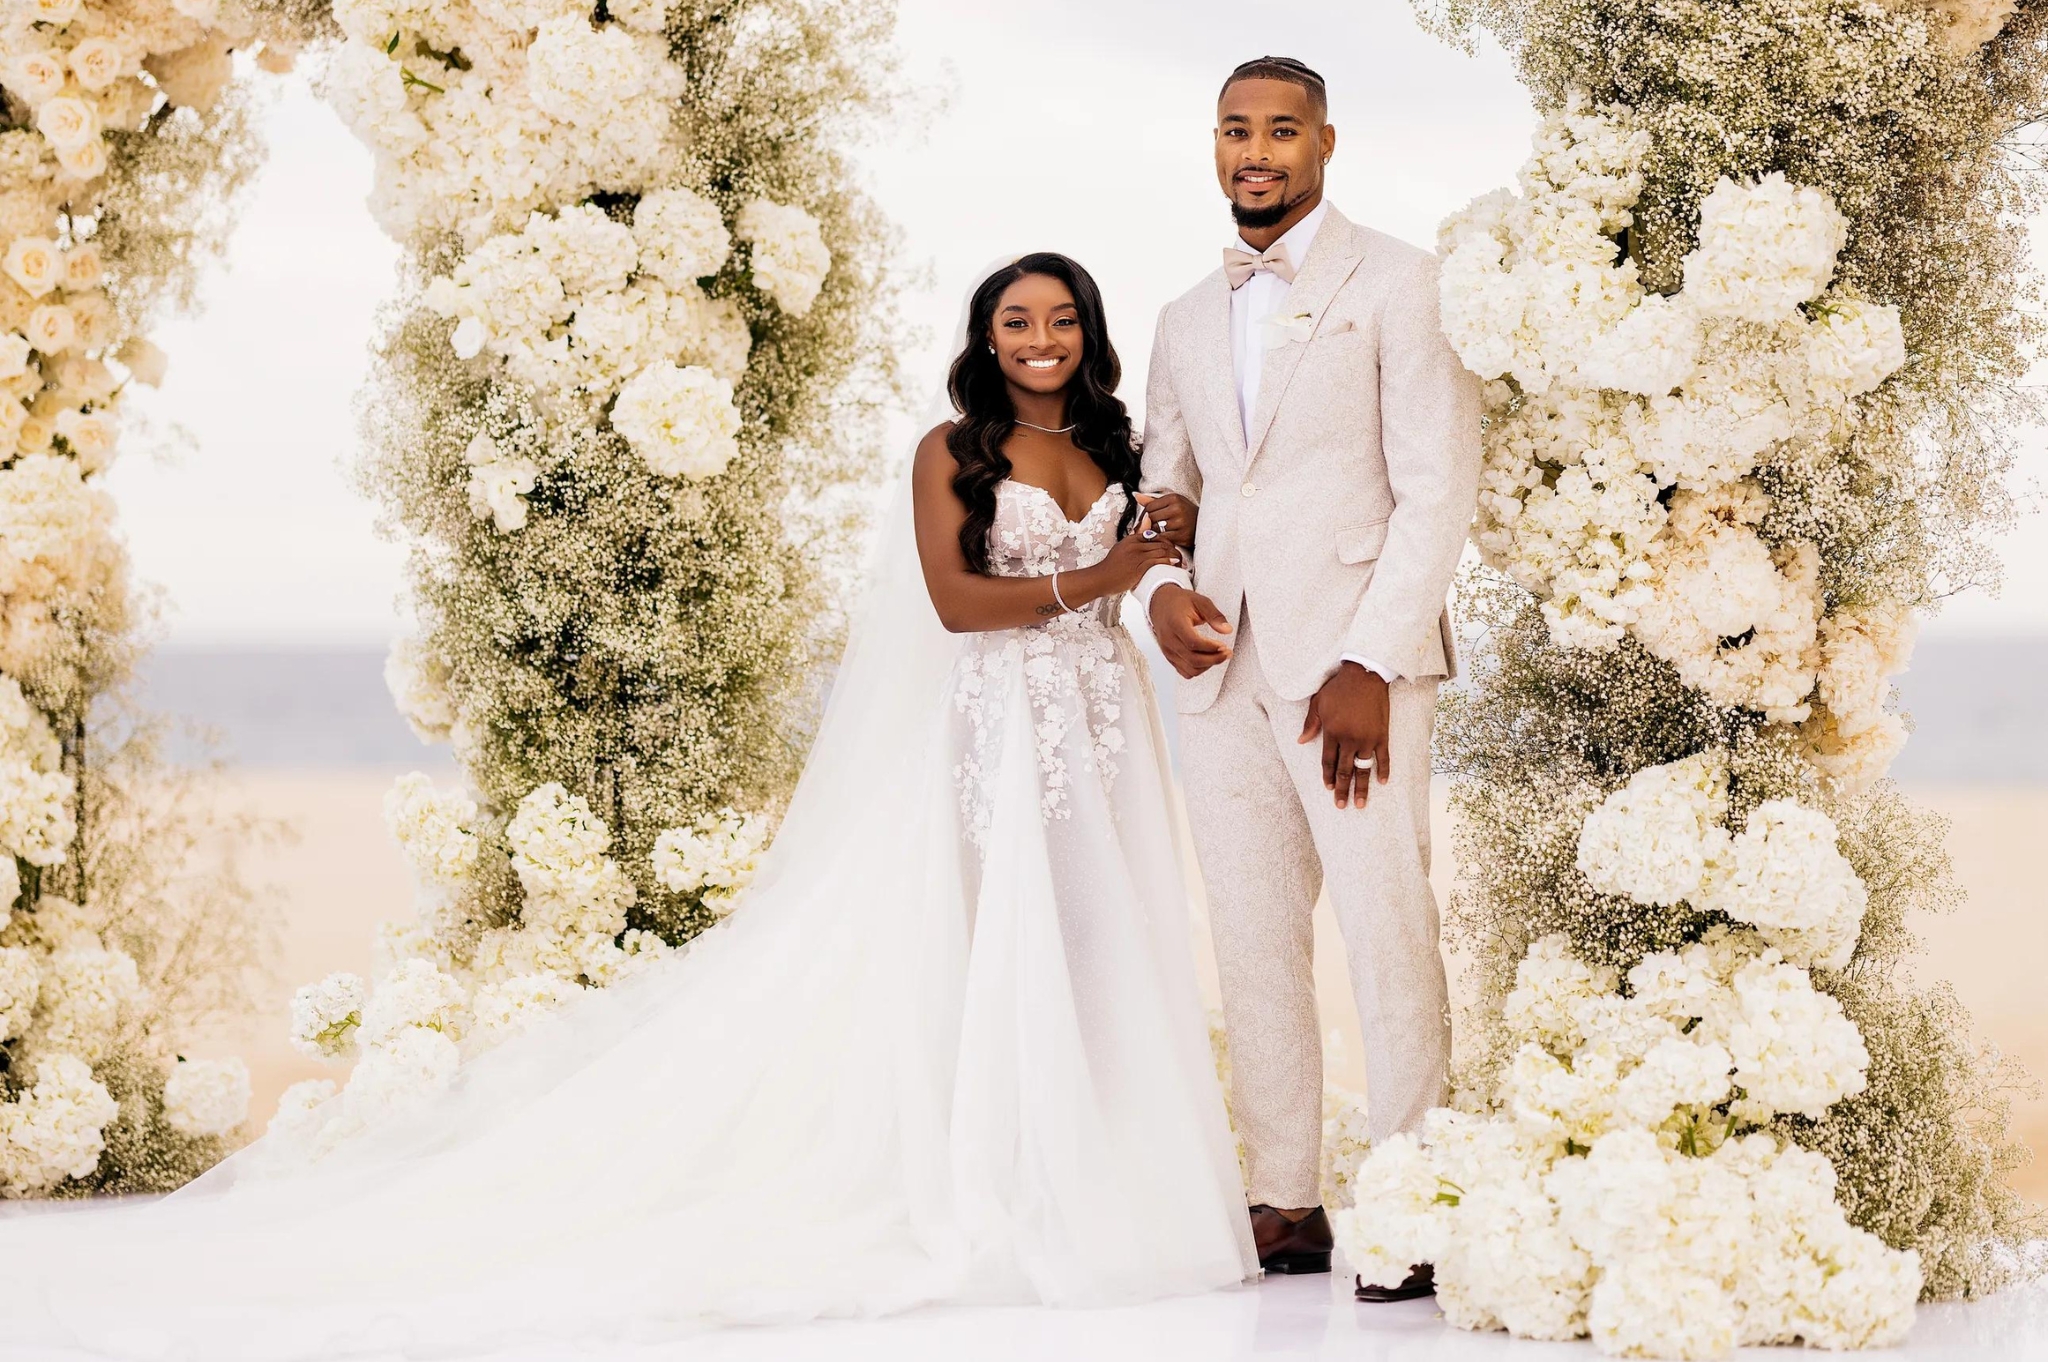 Simone Biles Owens and Jonathan Owens after their wedding on May 6, 2023.